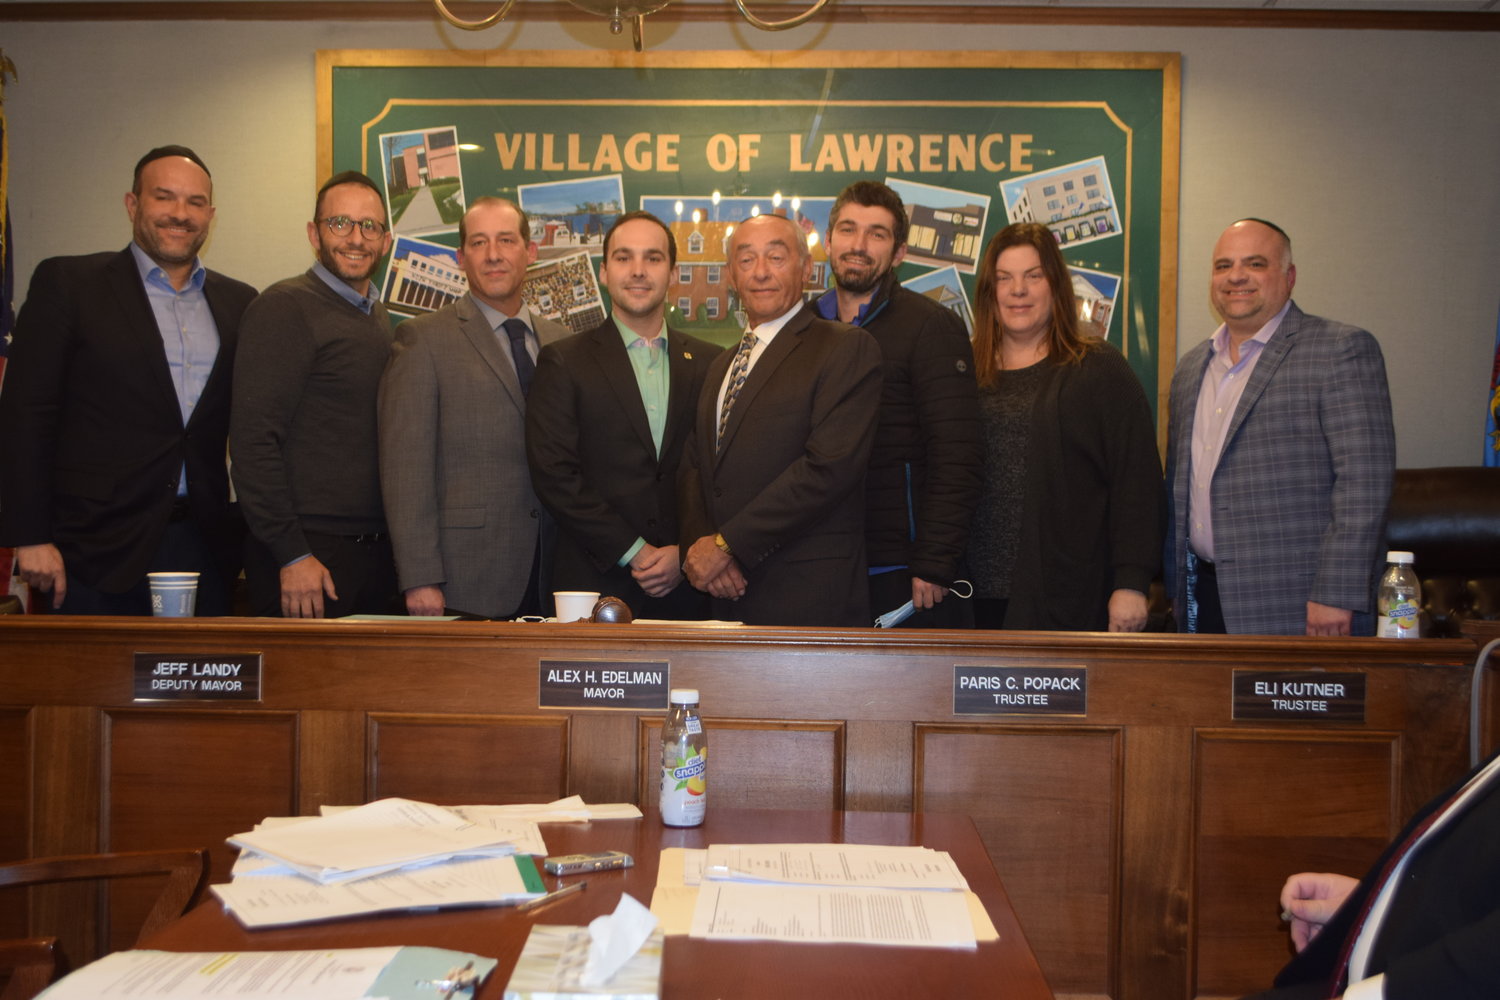 The new golf and tennis pros were introduced at the Jan. 13 meeting. From left were Trustees Michael Fragin and Jeff Landy, golf pro john Morrison, LY&CC General Manager Cory Menking, Mayor Alex Edelman, tennis pro Strate Krstevski, and Trustees Paris Popack and Eli Kutner.